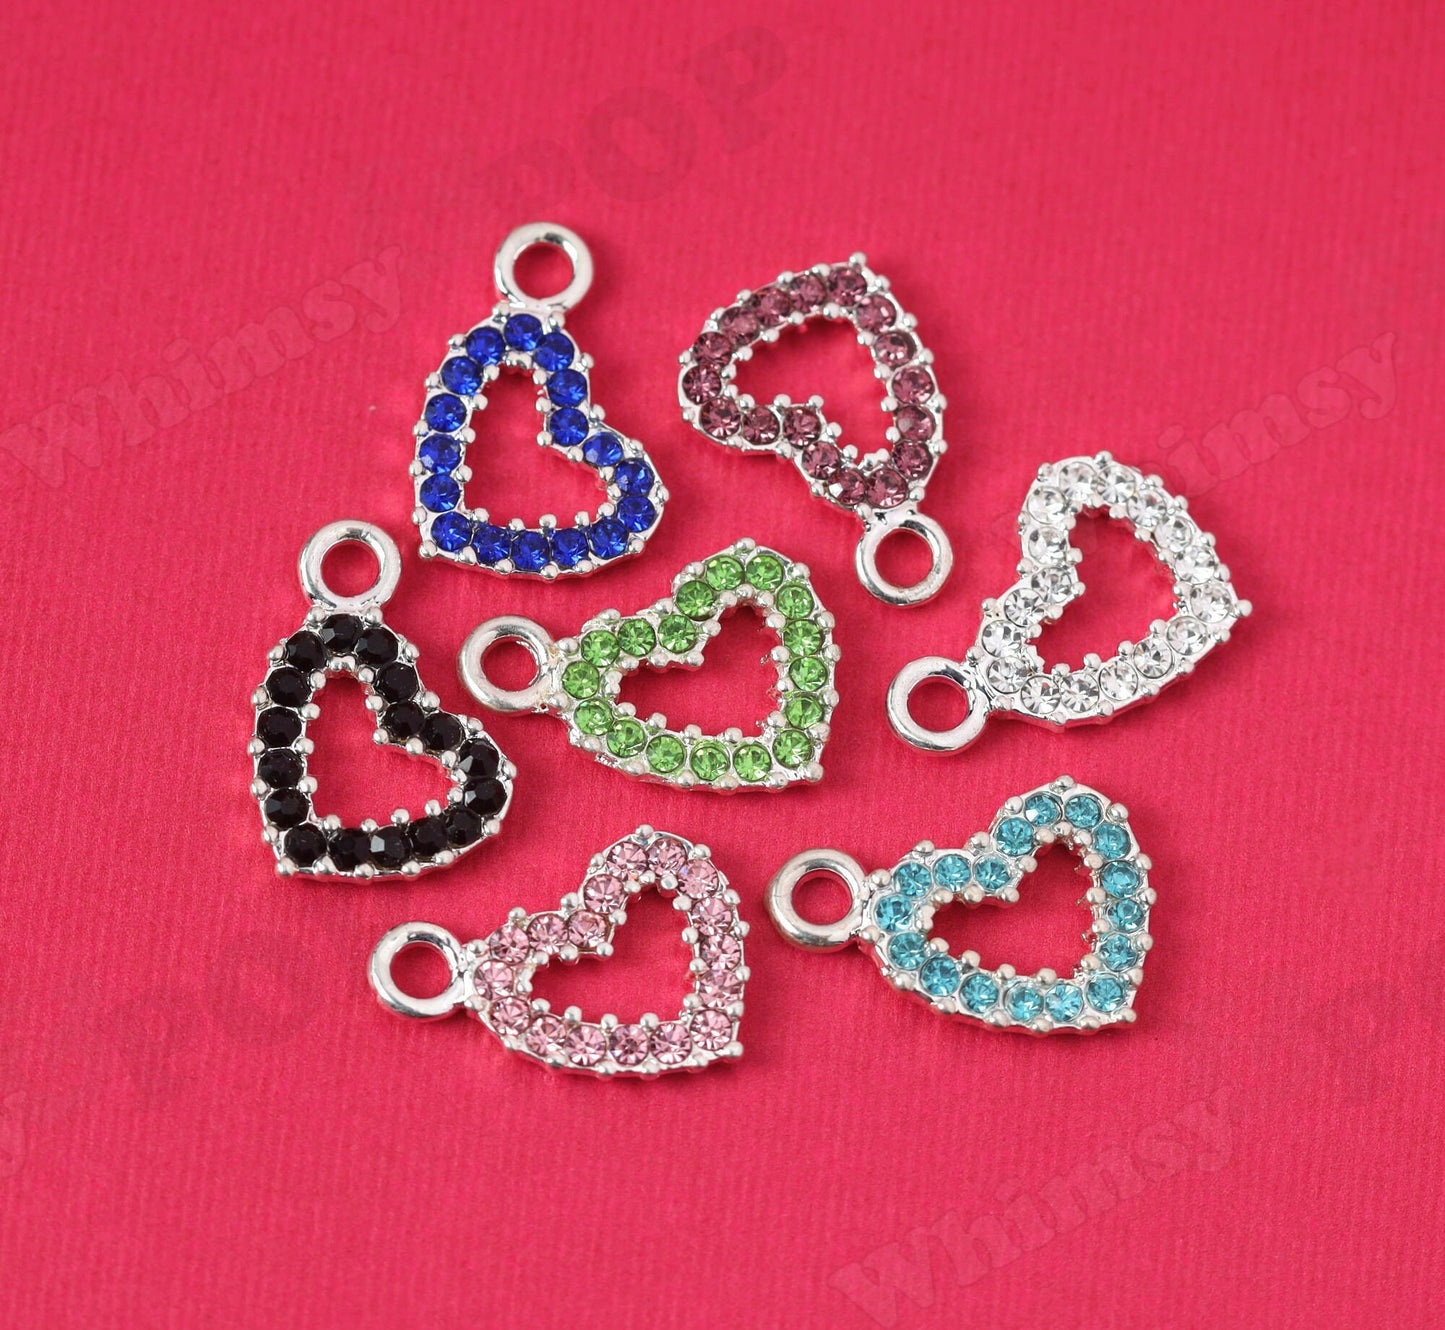 Heart Charms in Many Colors for DIY Jewelry